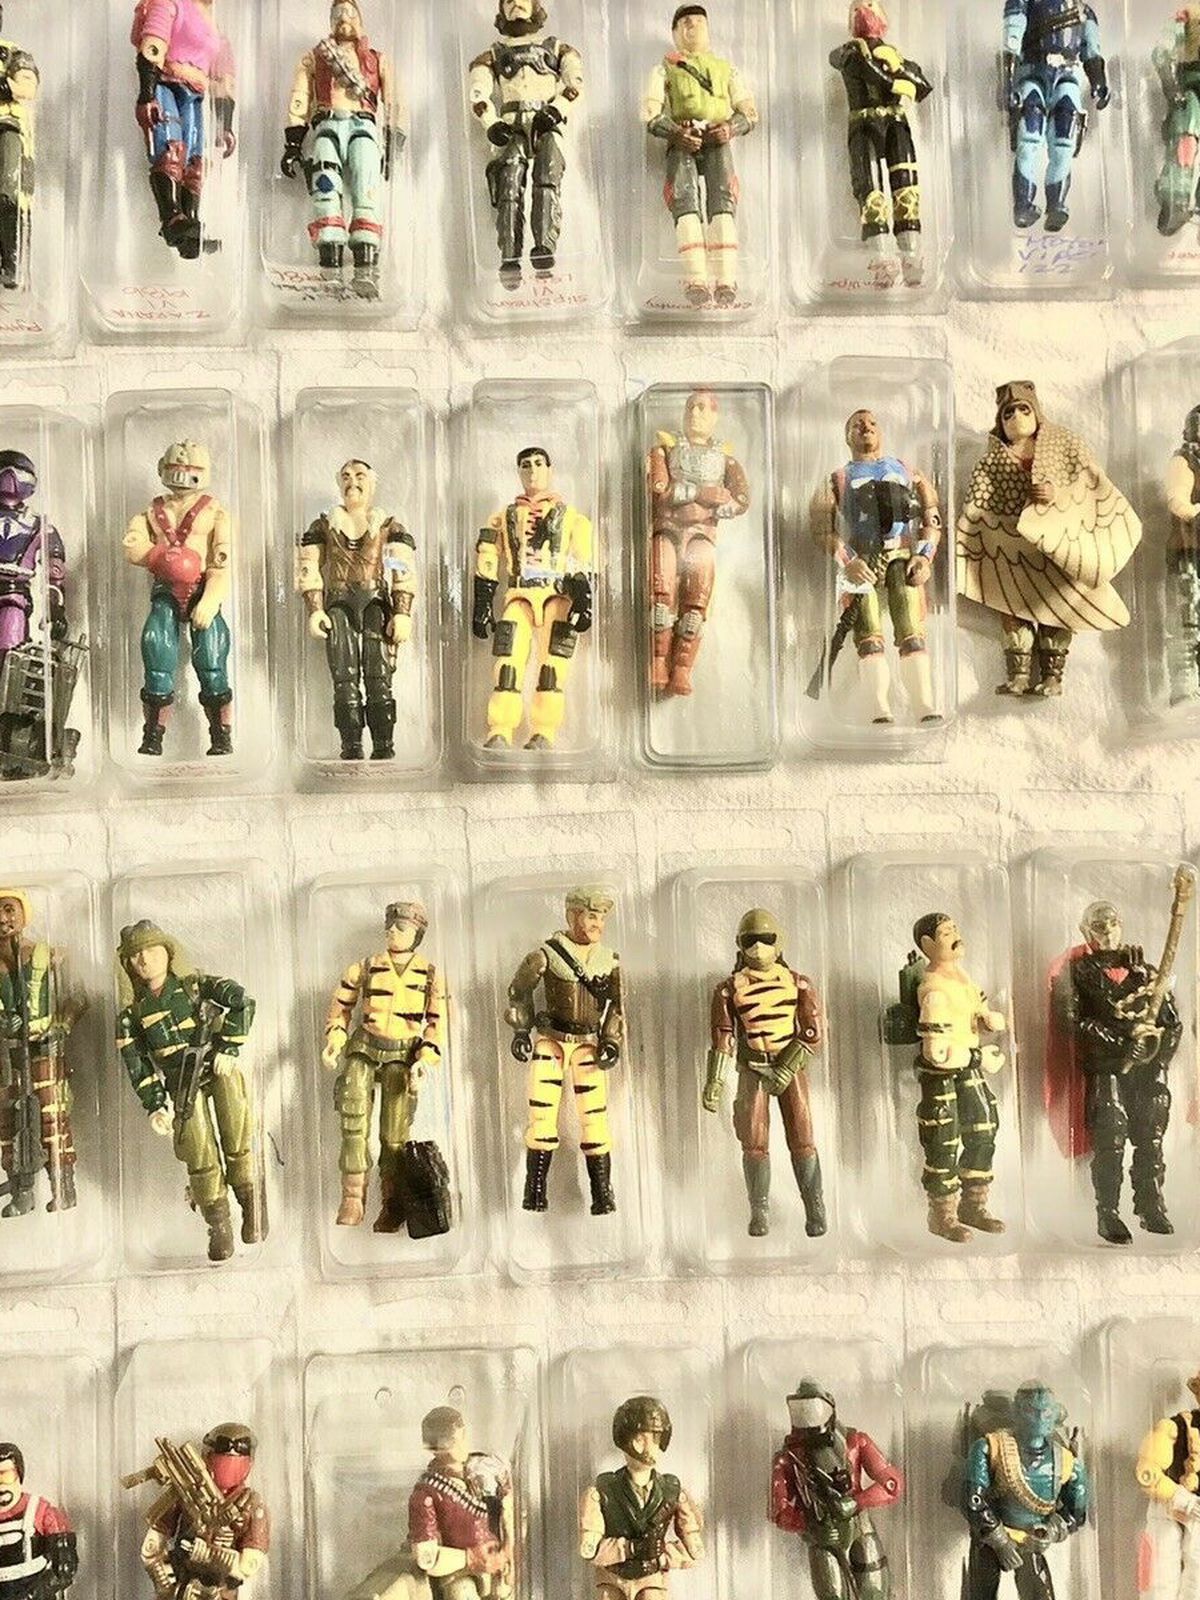 Collector seeking vintage old GI Joe toys dolls action figures accessories 1960s 70s 80s g.i. Joes toy figure doll collector collectibles 